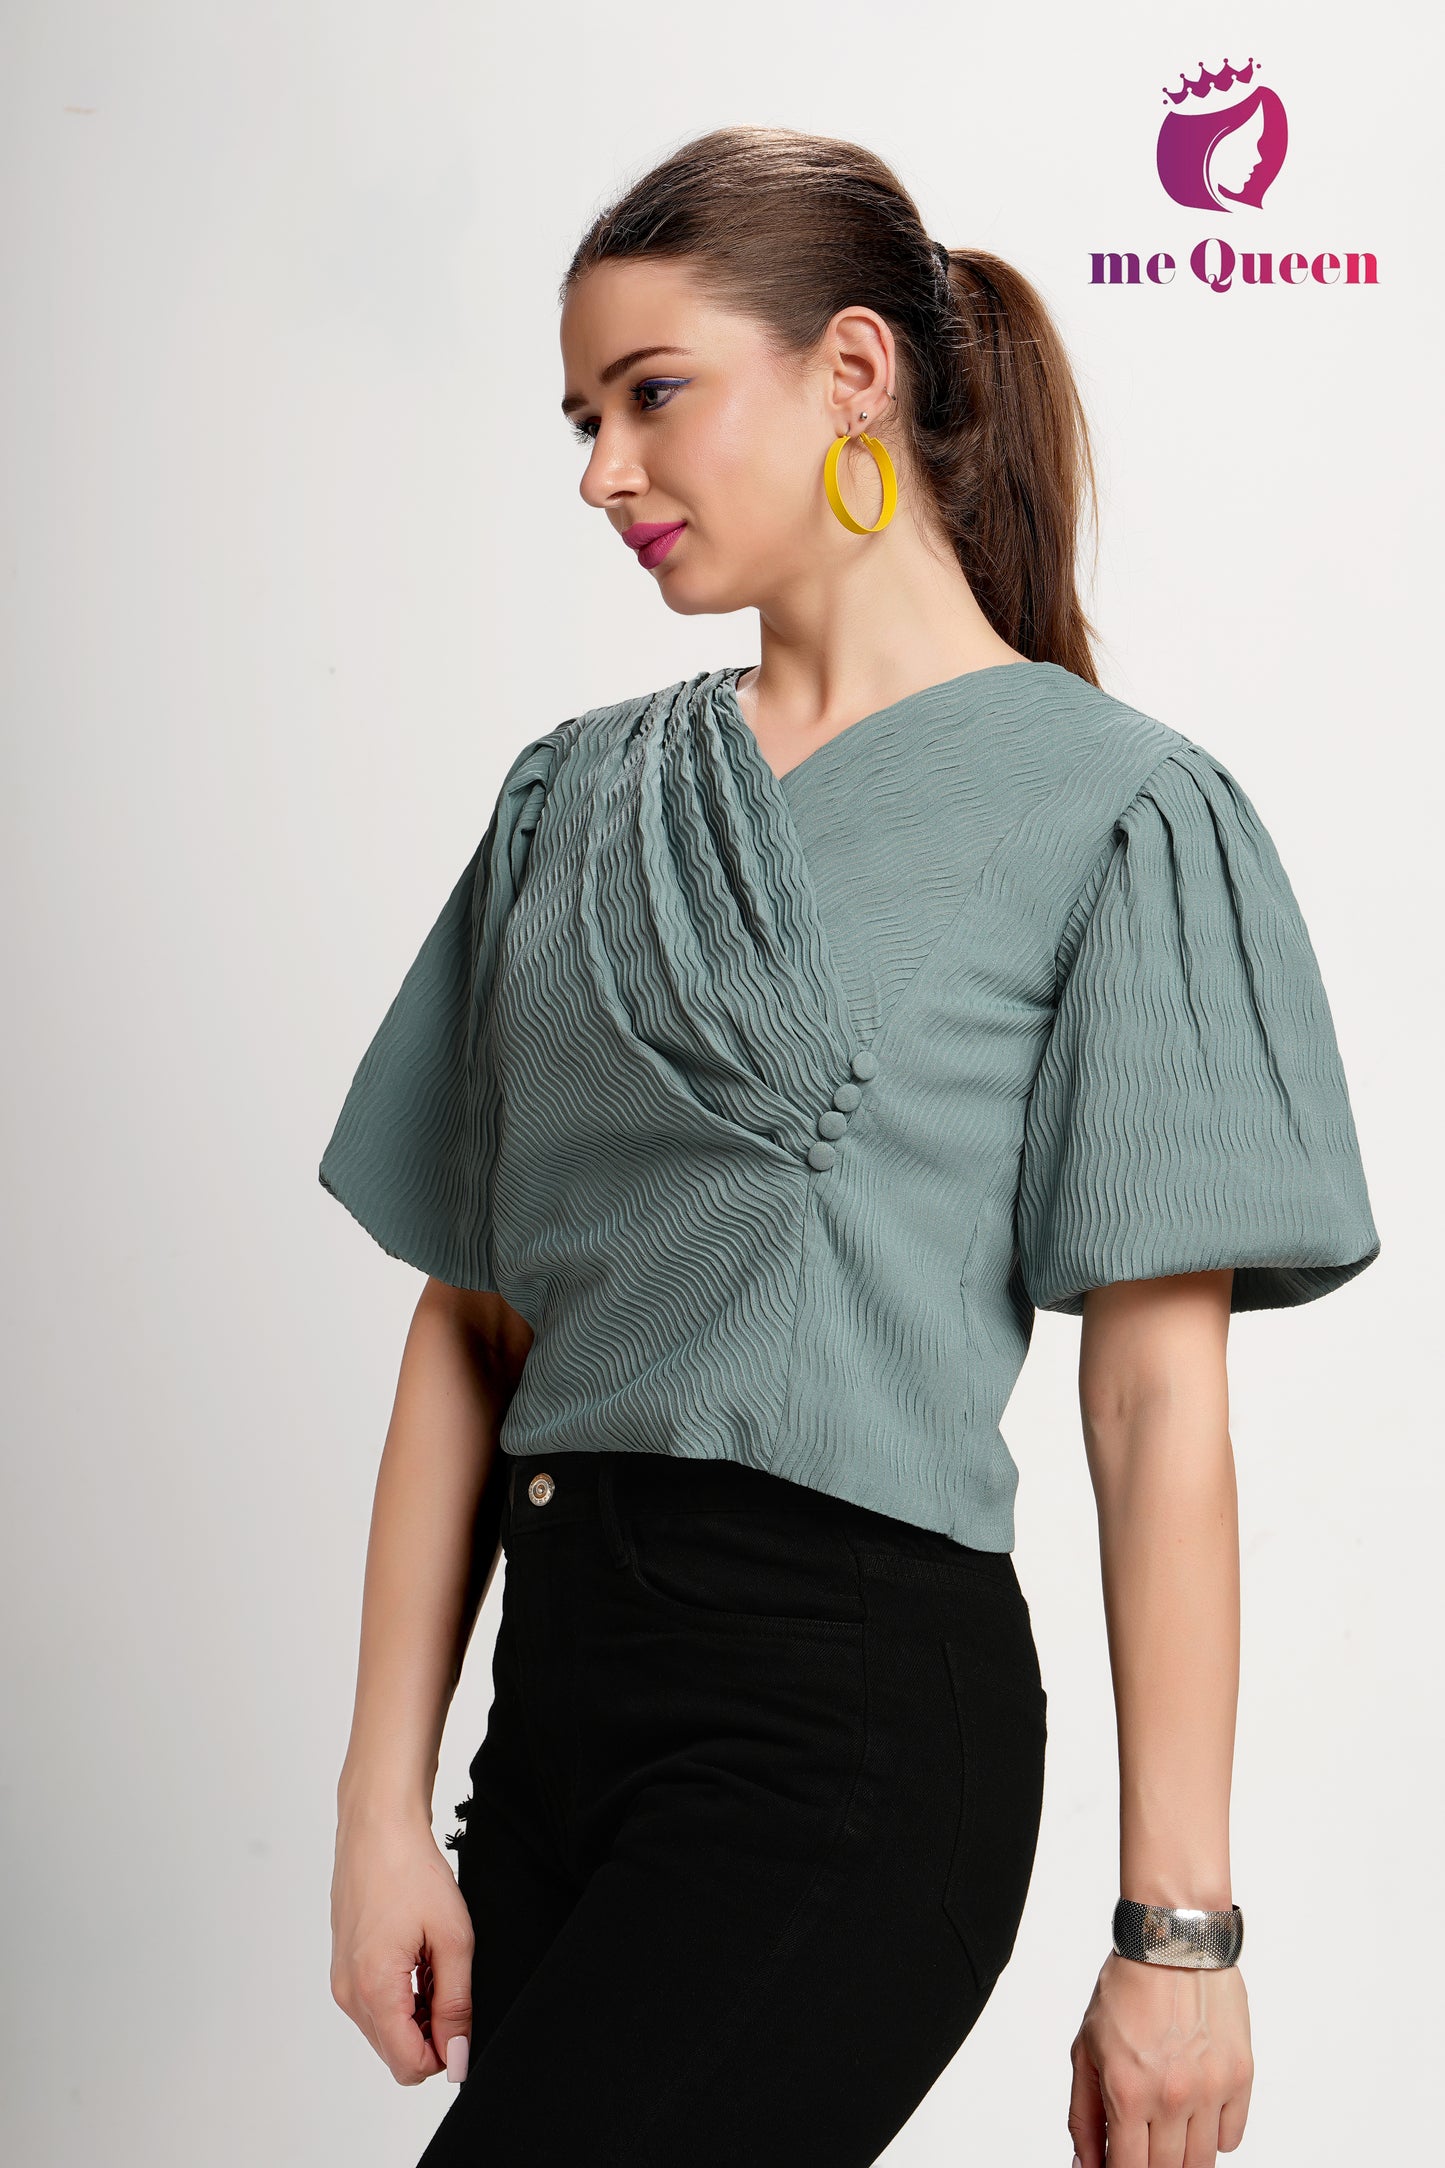 MeQueen's Women's Stylish Pattern Green Top with Puff Sleeves